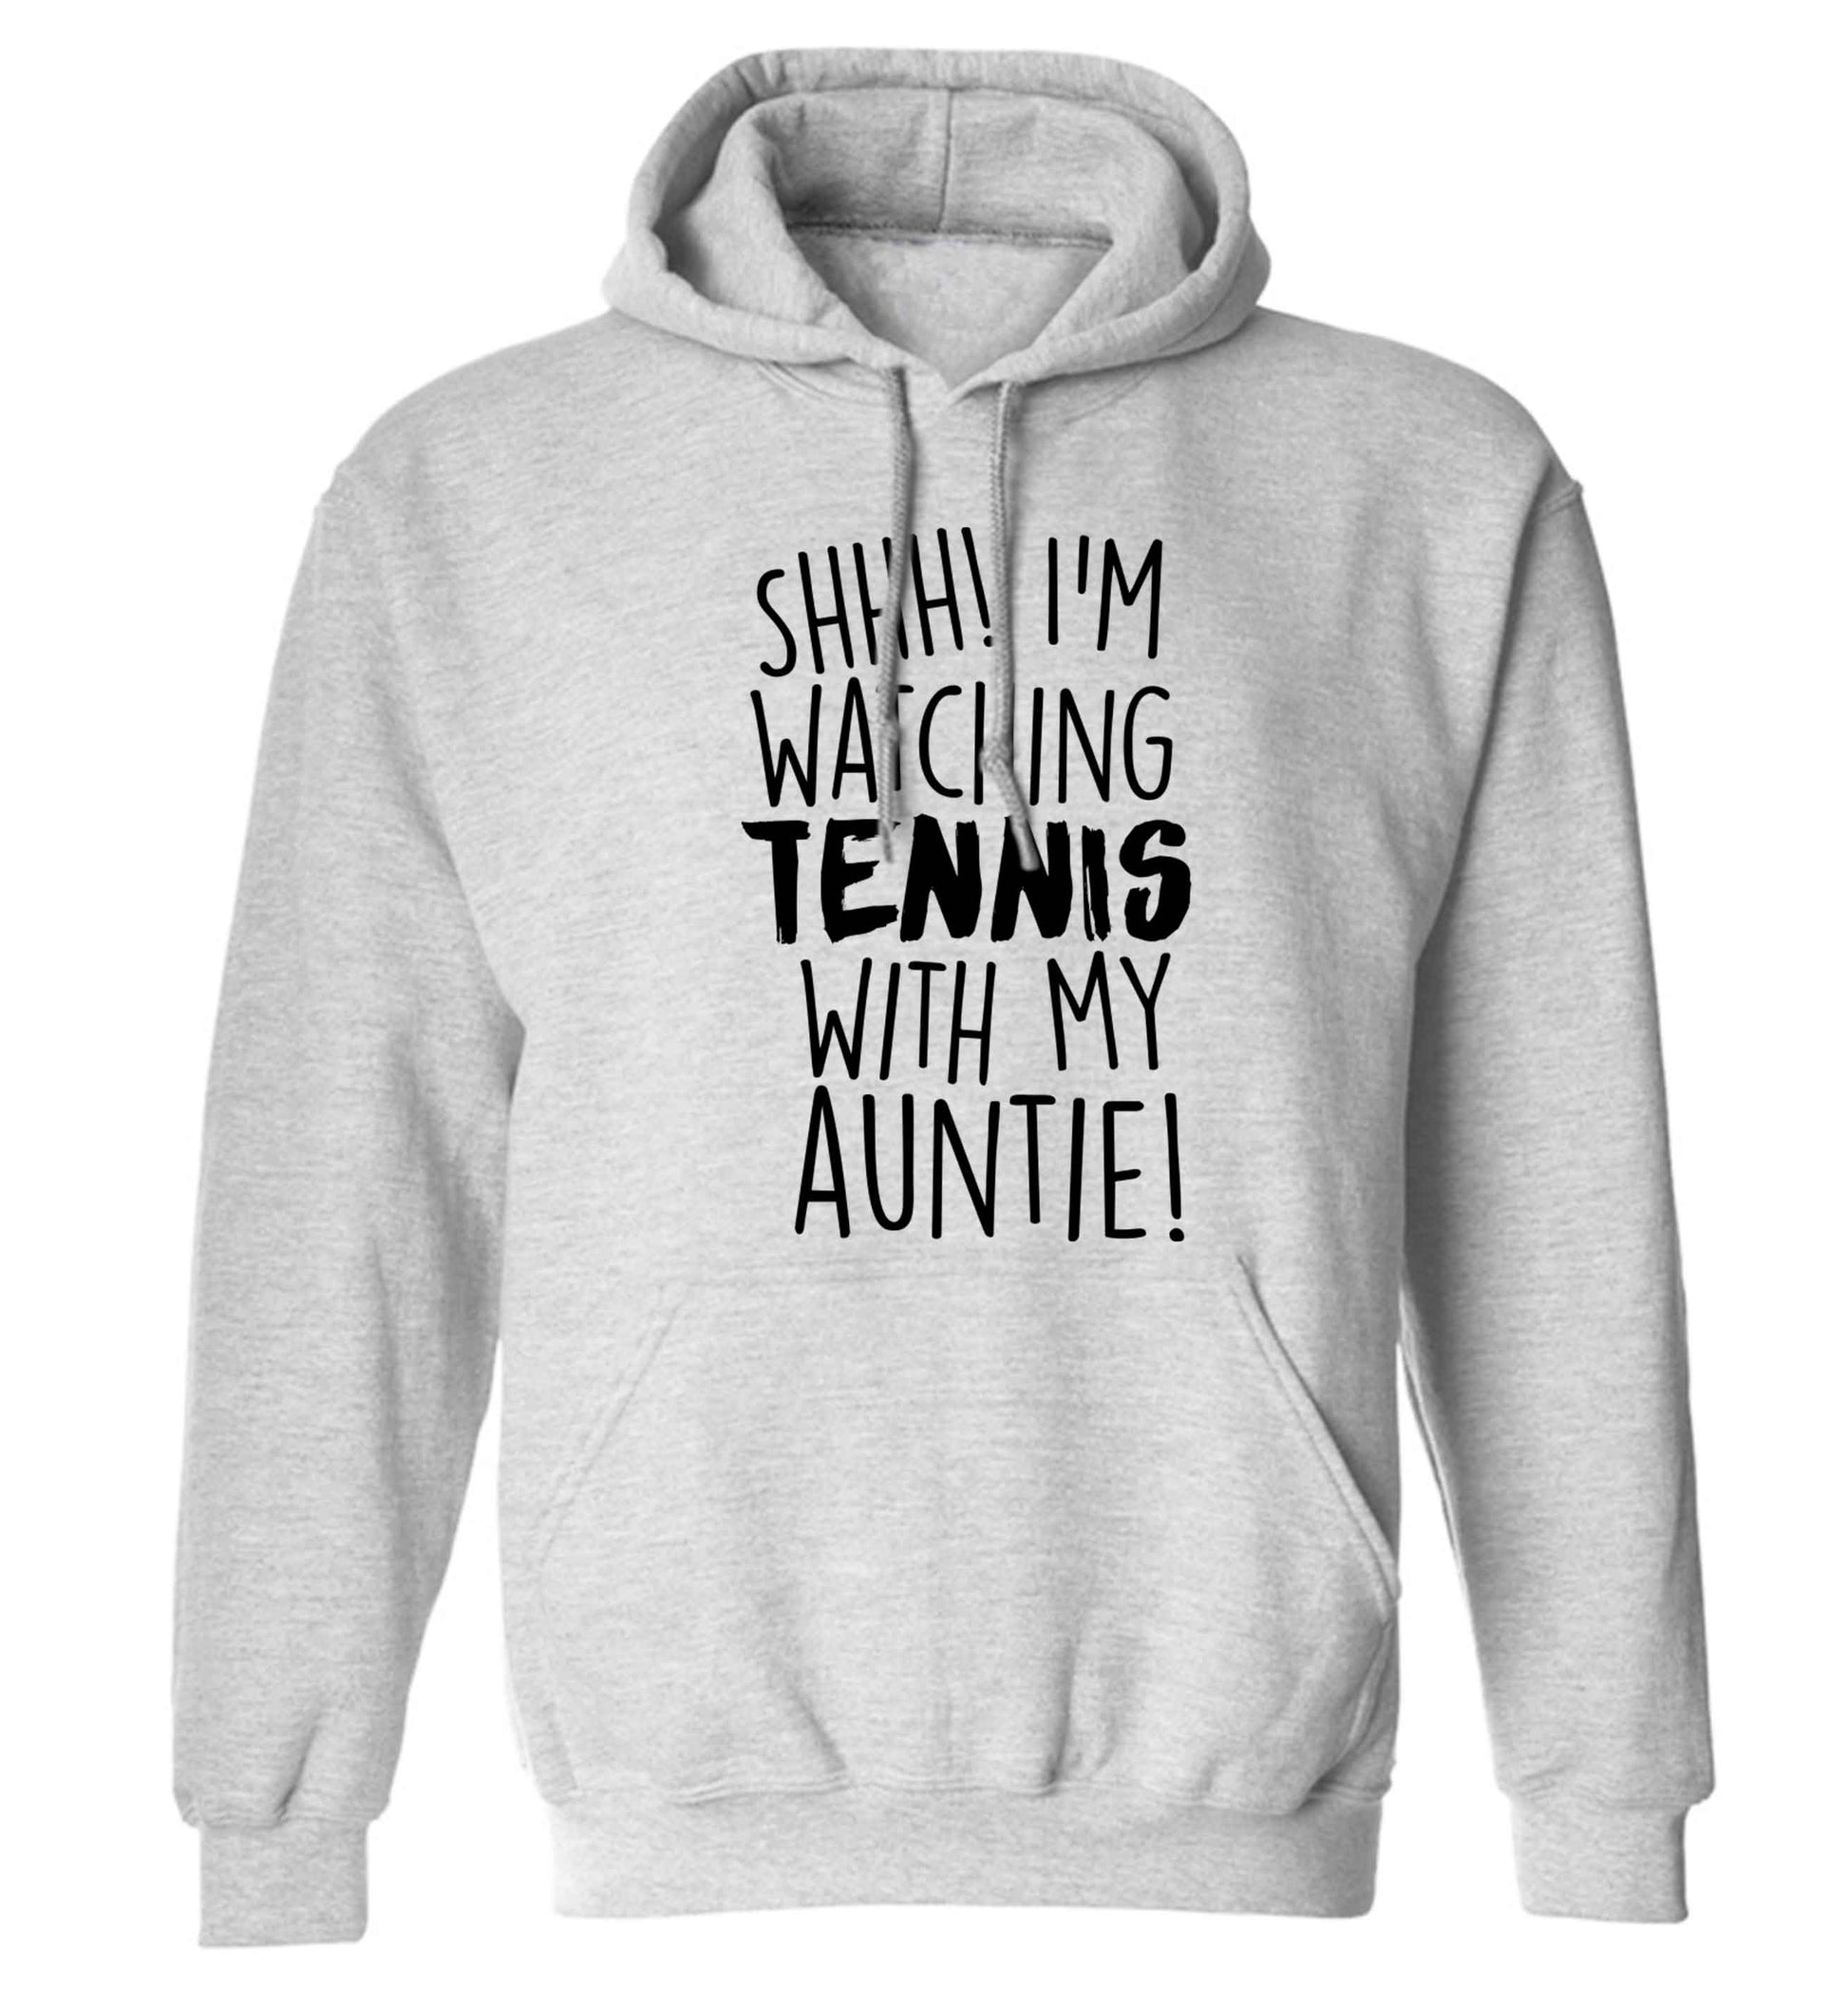 Shh! I'm watching tennis with my auntie! adults unisex grey hoodie 2XL